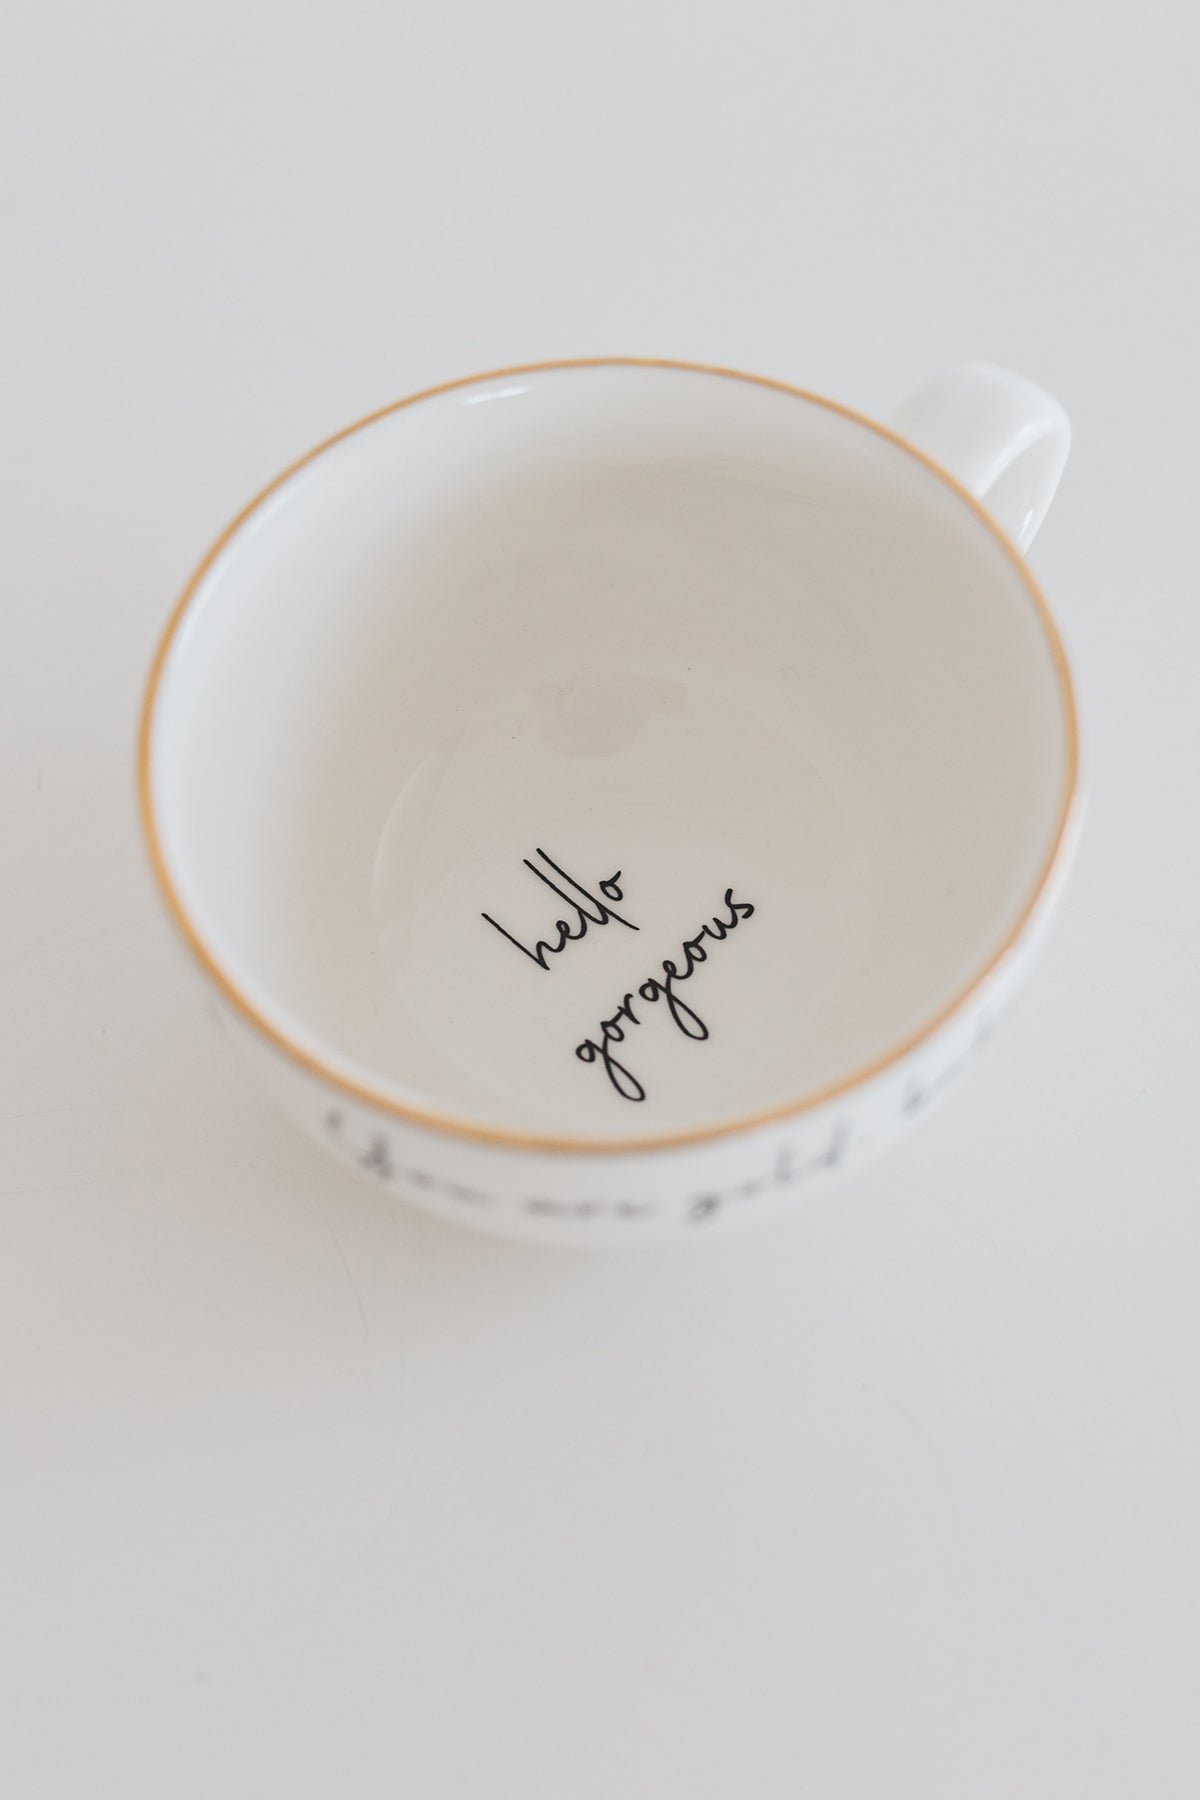 Hidden Message Mug You are Gold Baby, You are Gorgeous